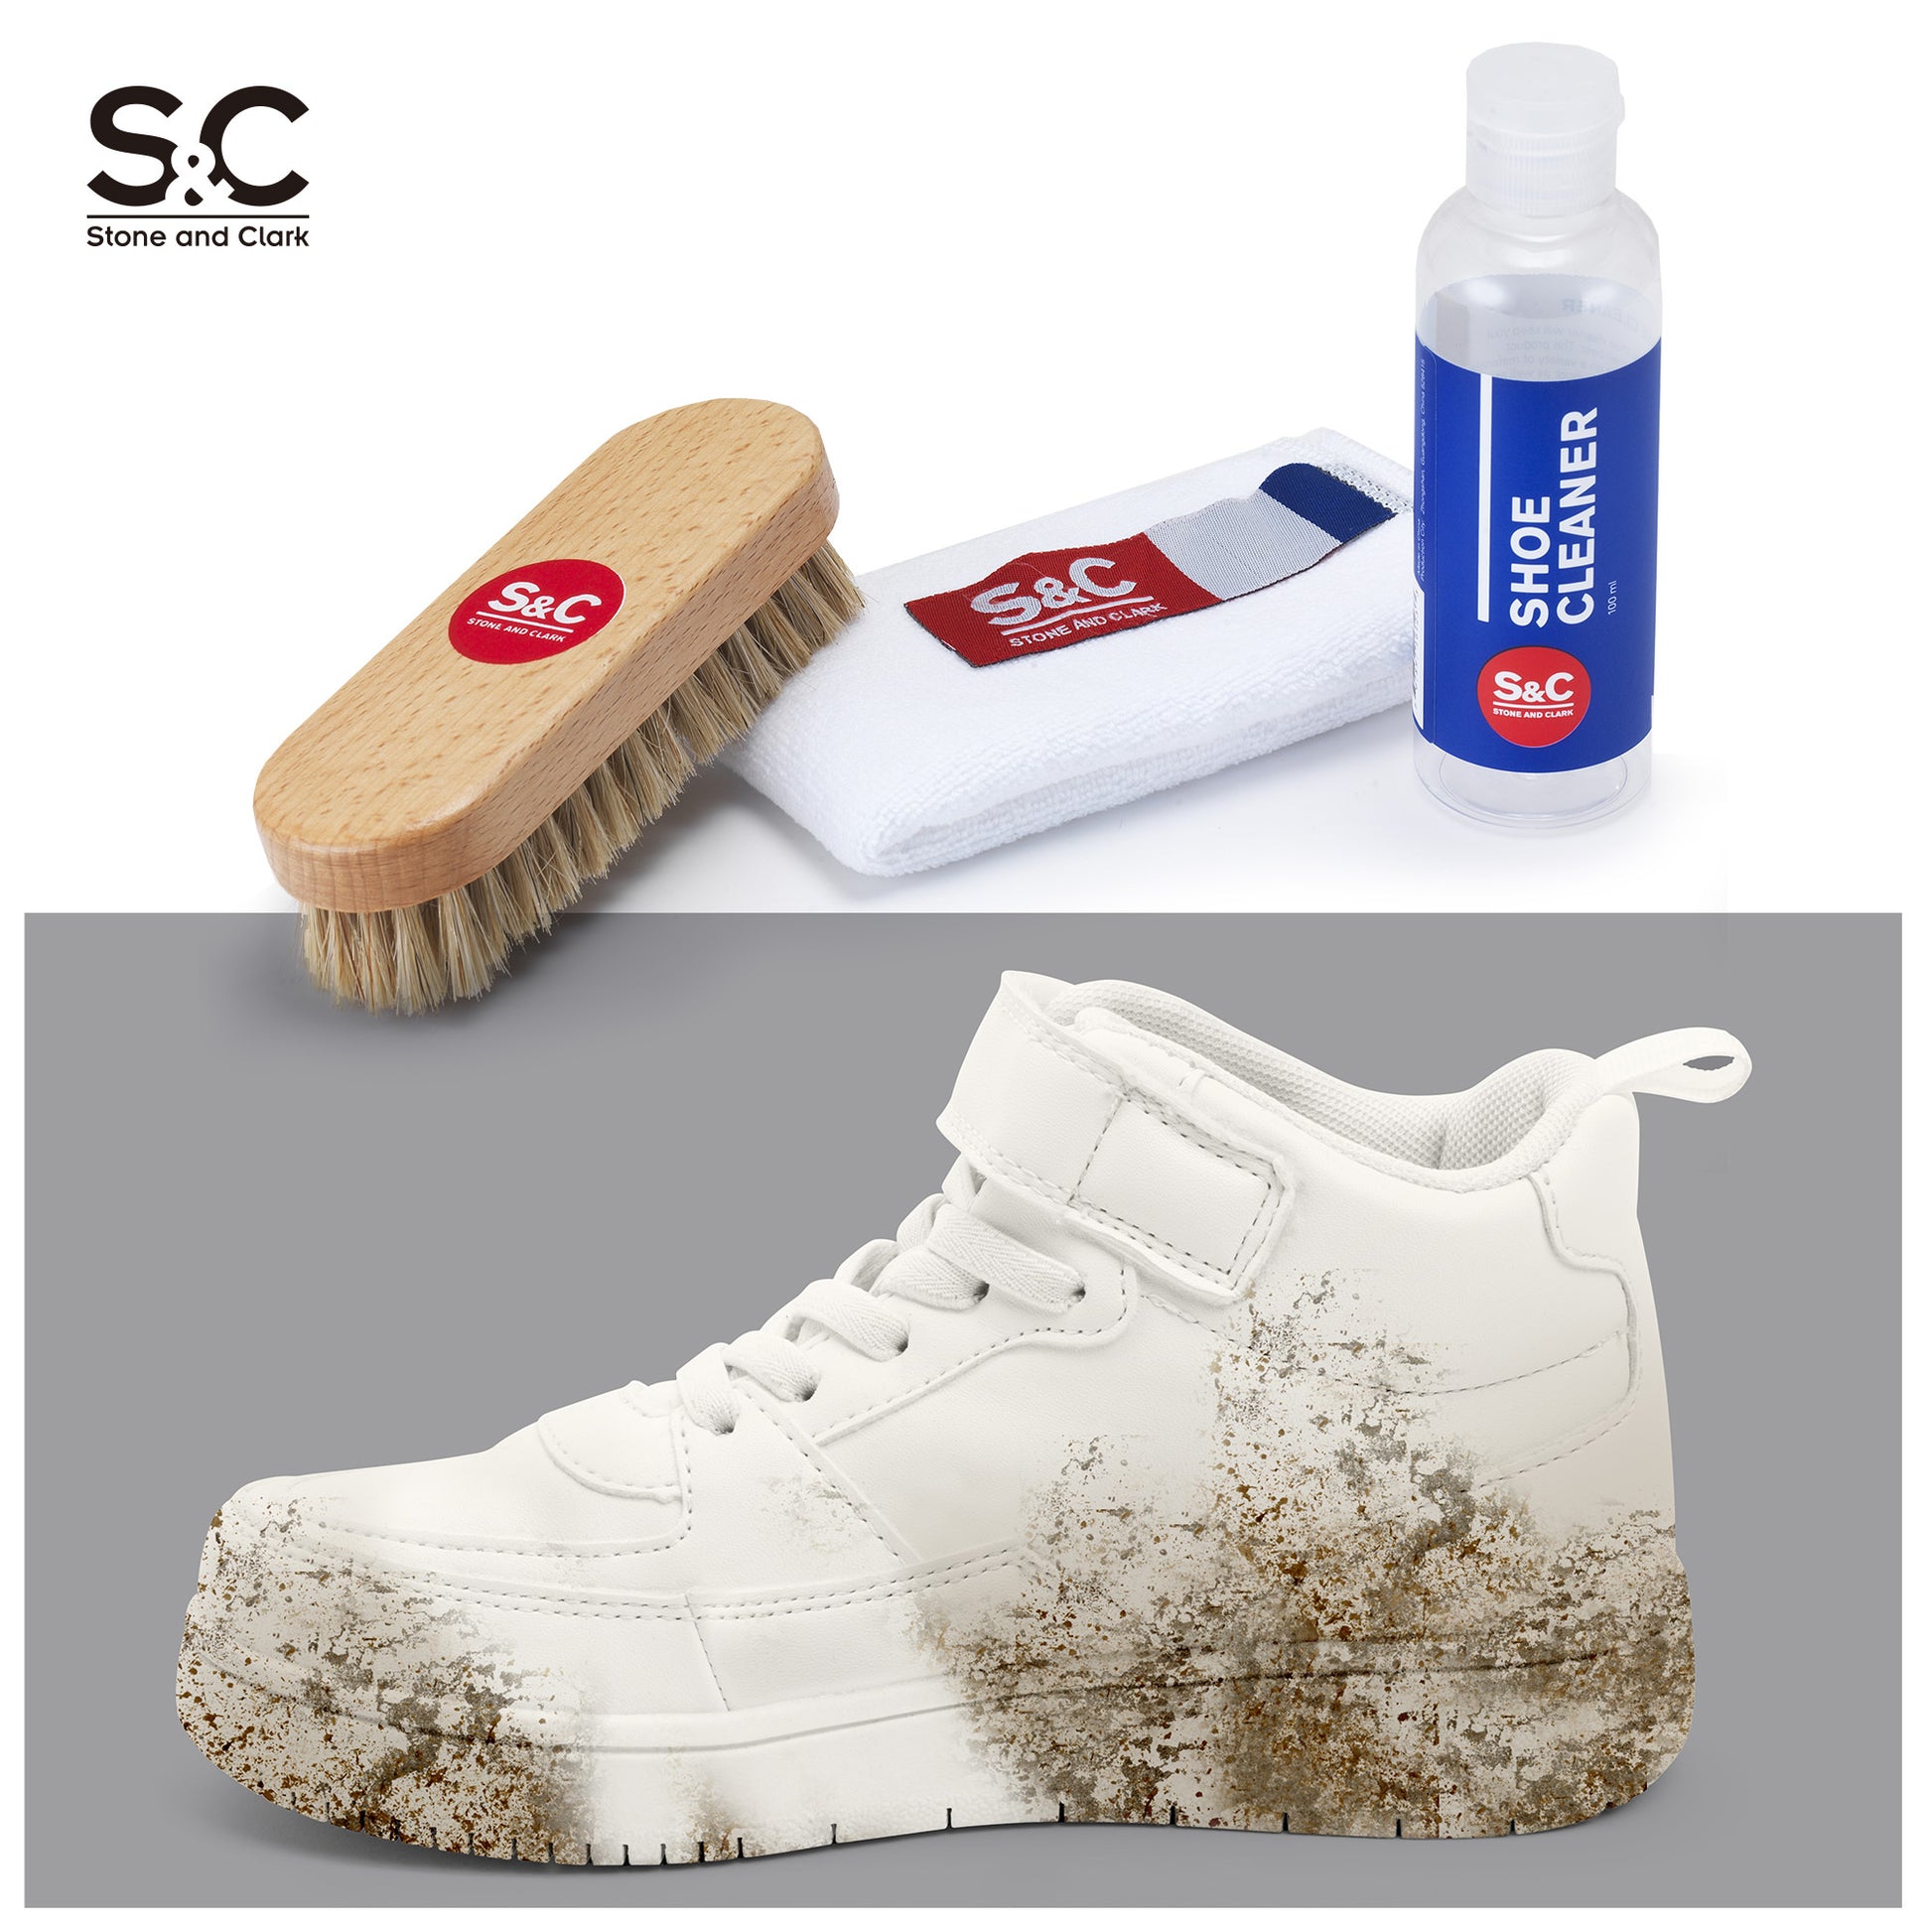 Stone and Clark Compact Sneaker Cleaner: Easy On-The-Go Kit